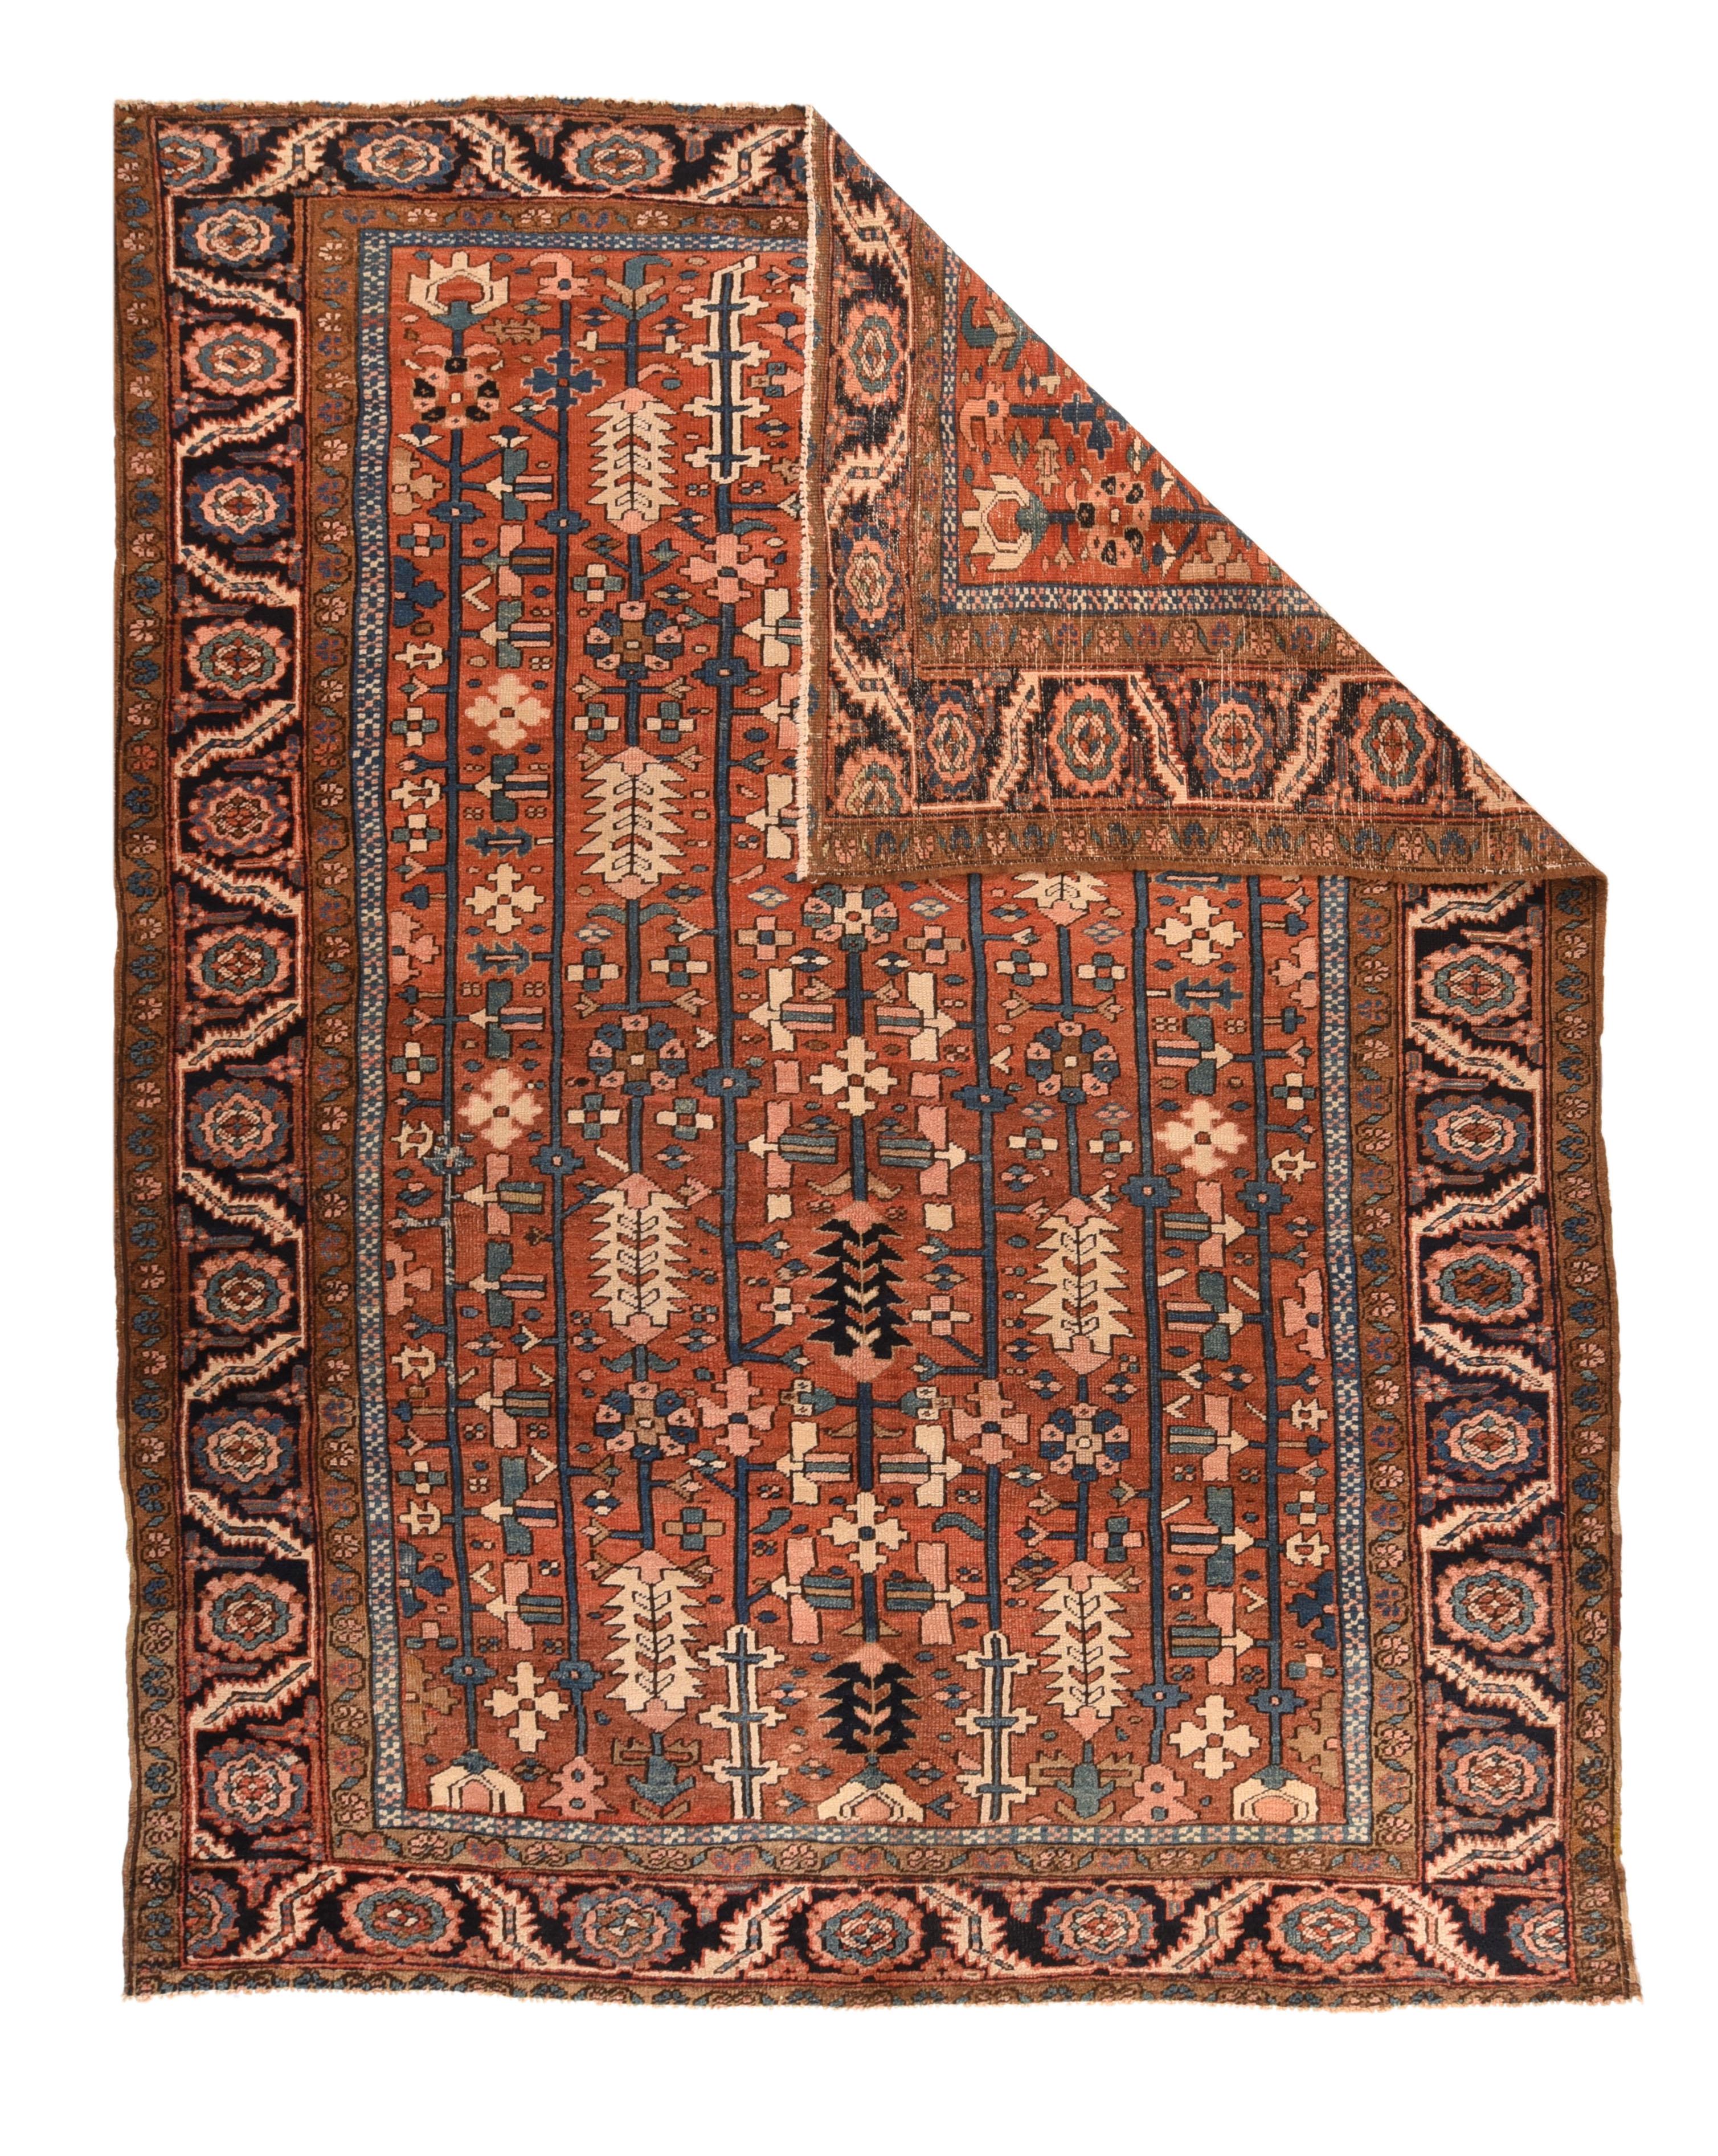 Antique Heriz Rug 8'6'' x 10'11''. Of moderately coarse weave on cotton, this semi-geometric rust-red ground village carpet features six full field length poles with pinecones, Maltese crosses and formal palmettes. Abrashed sapphire blue strip style